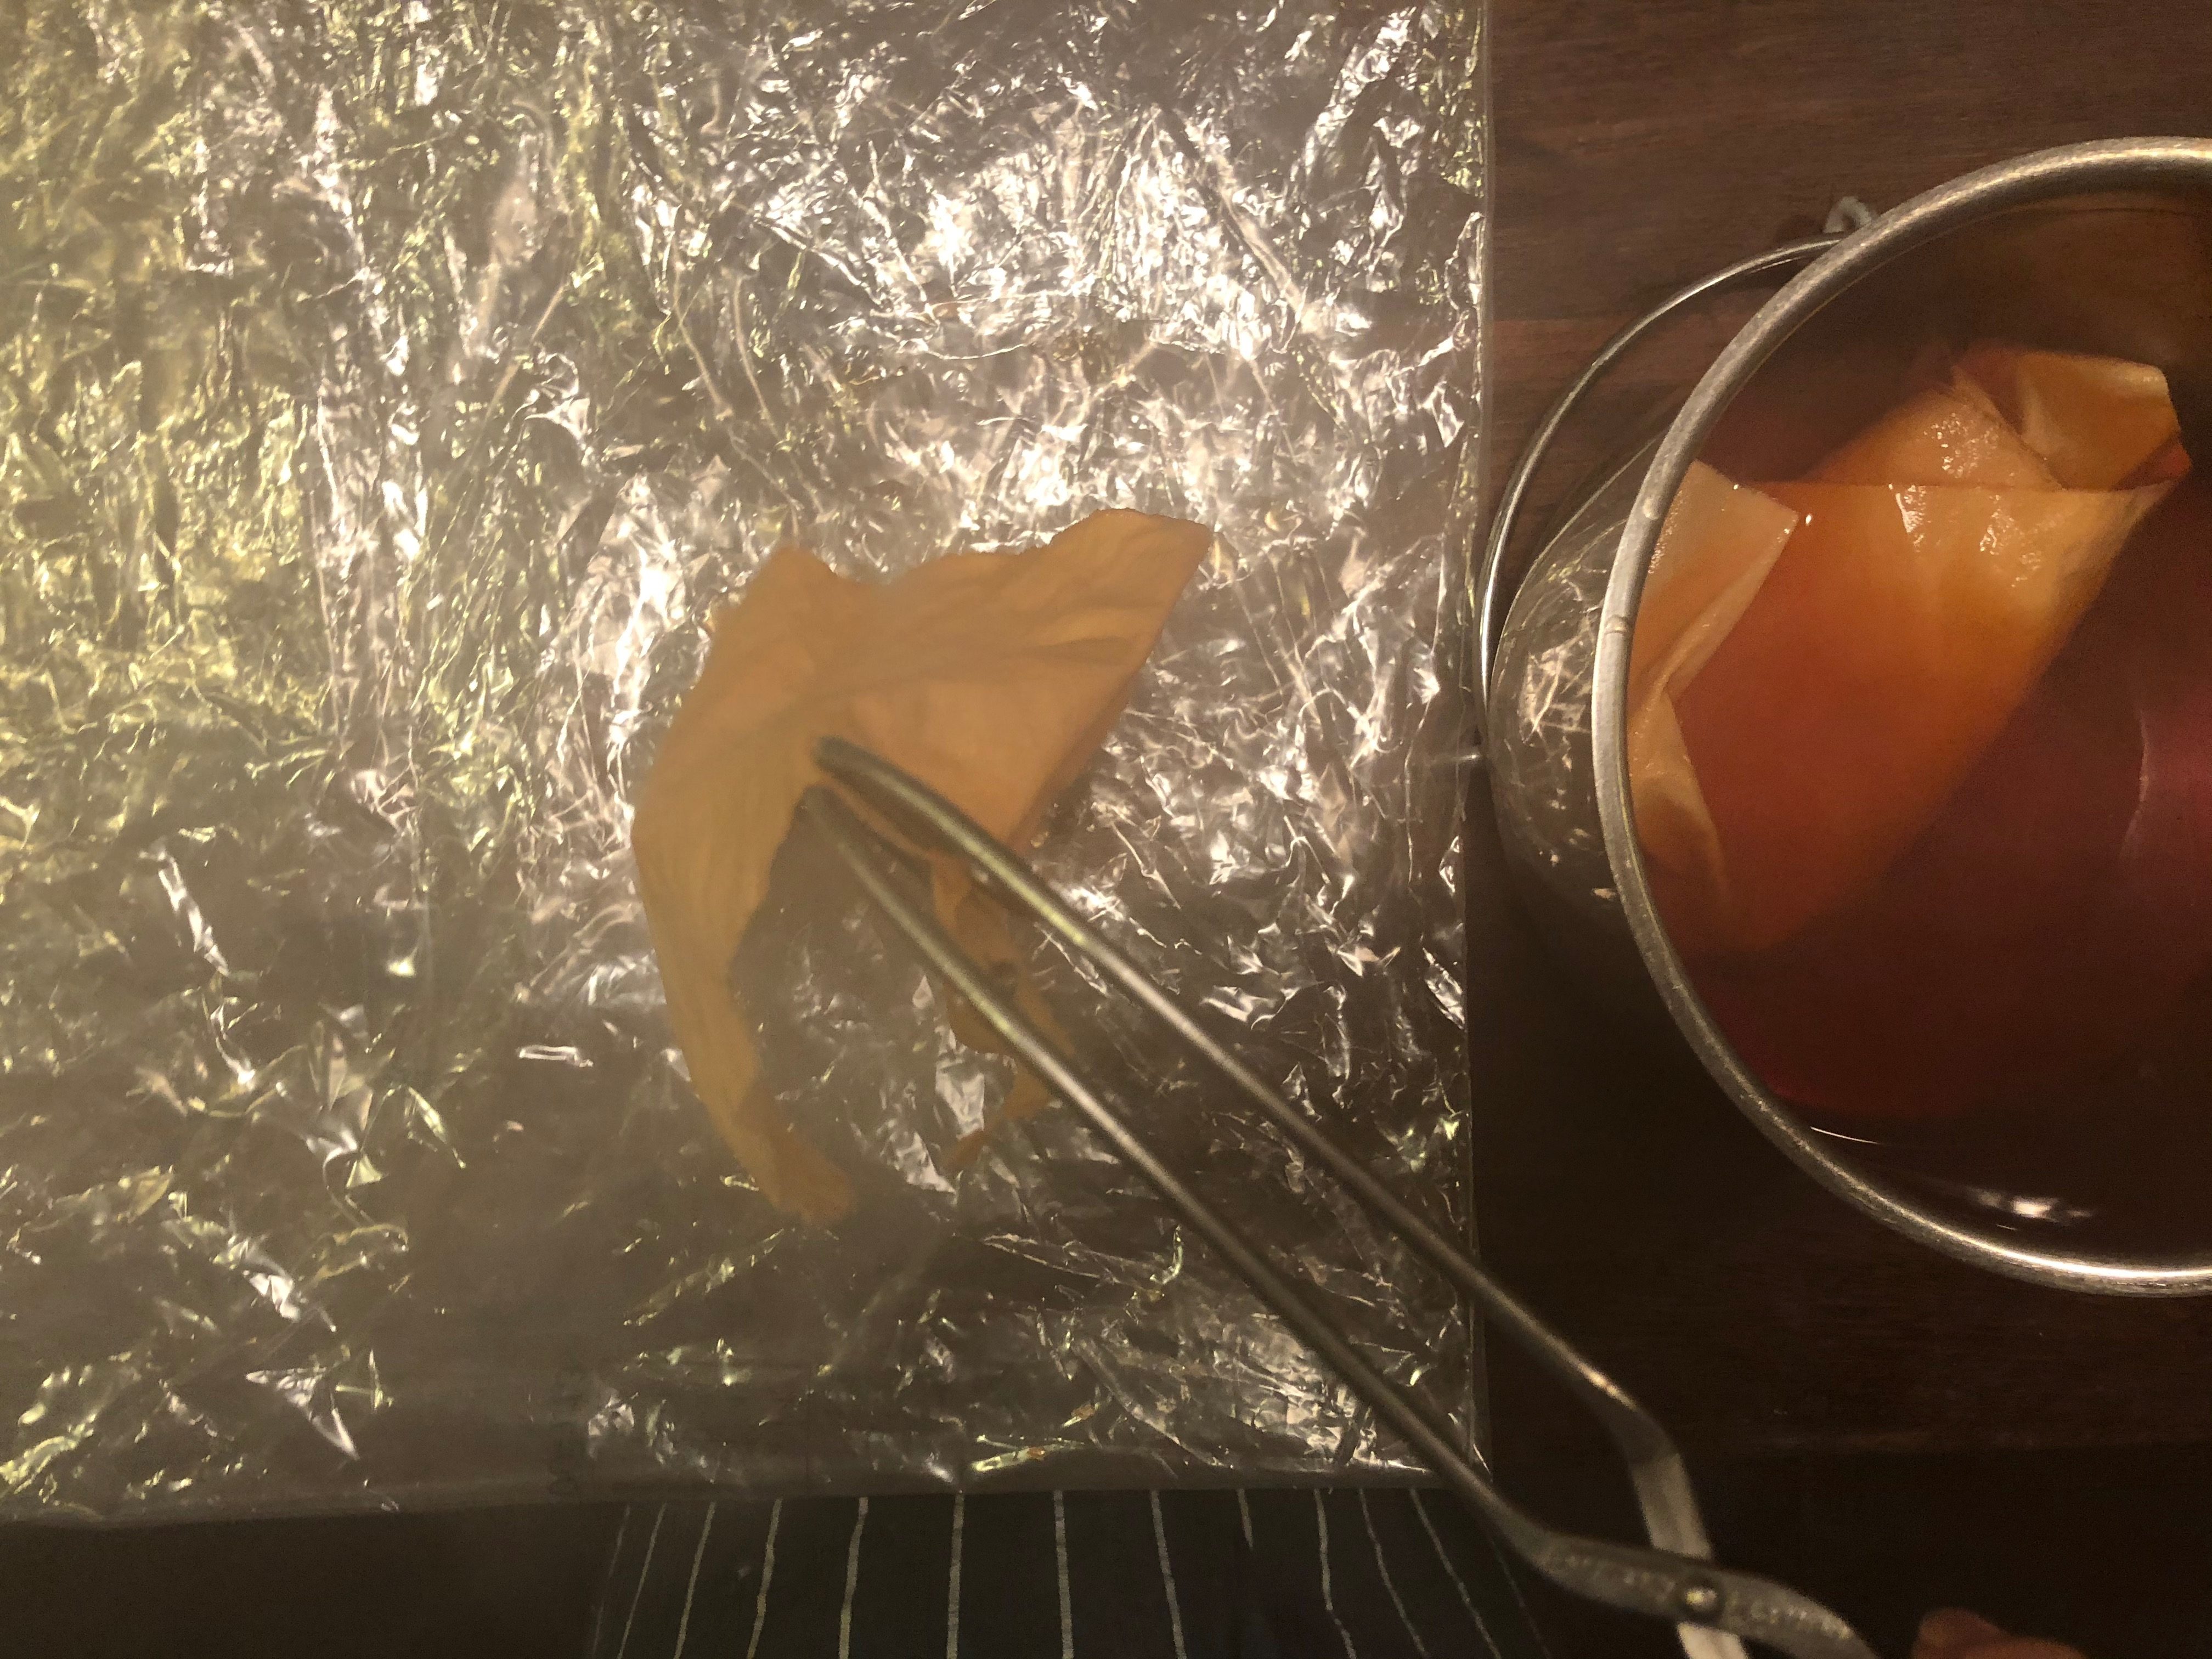 Tongs removing fabric from saucepan and hovering over plastic sheet.